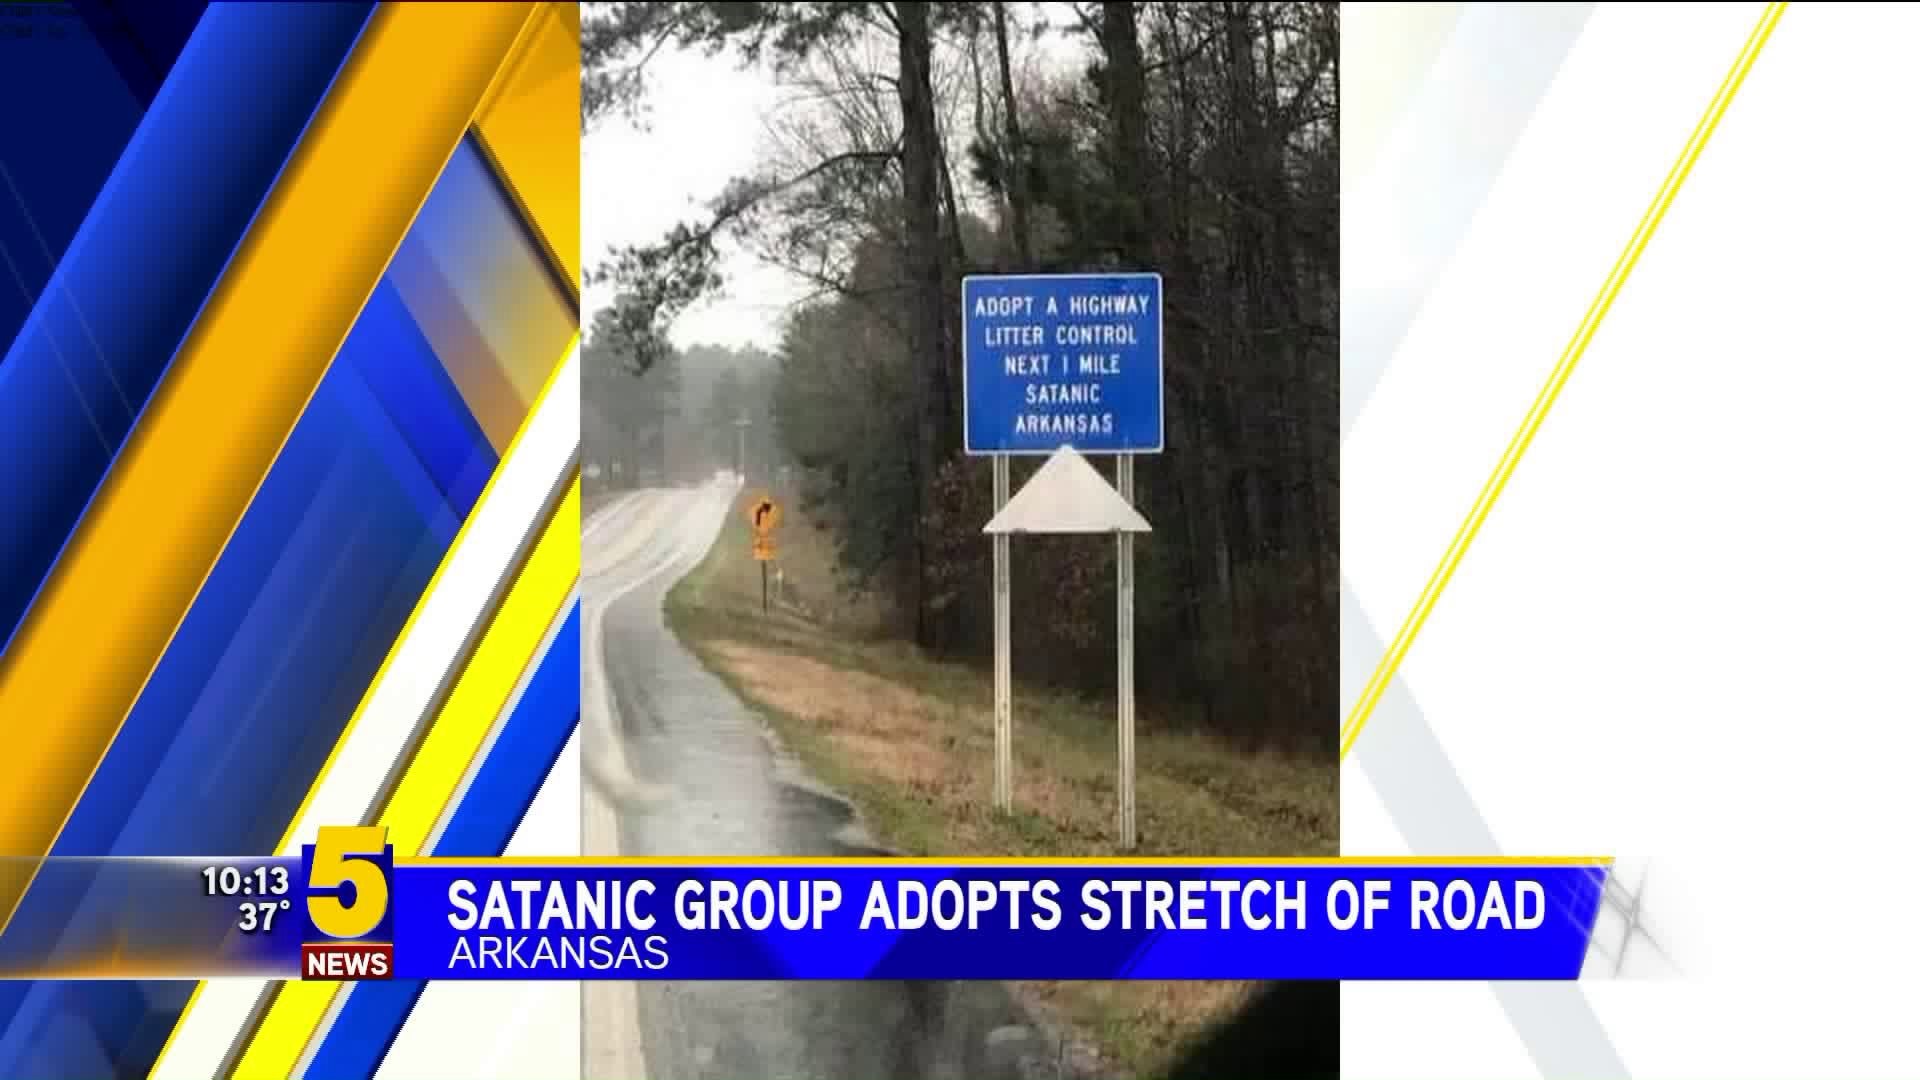 Satanic Group Adopts Stretch of Road in Arkansas